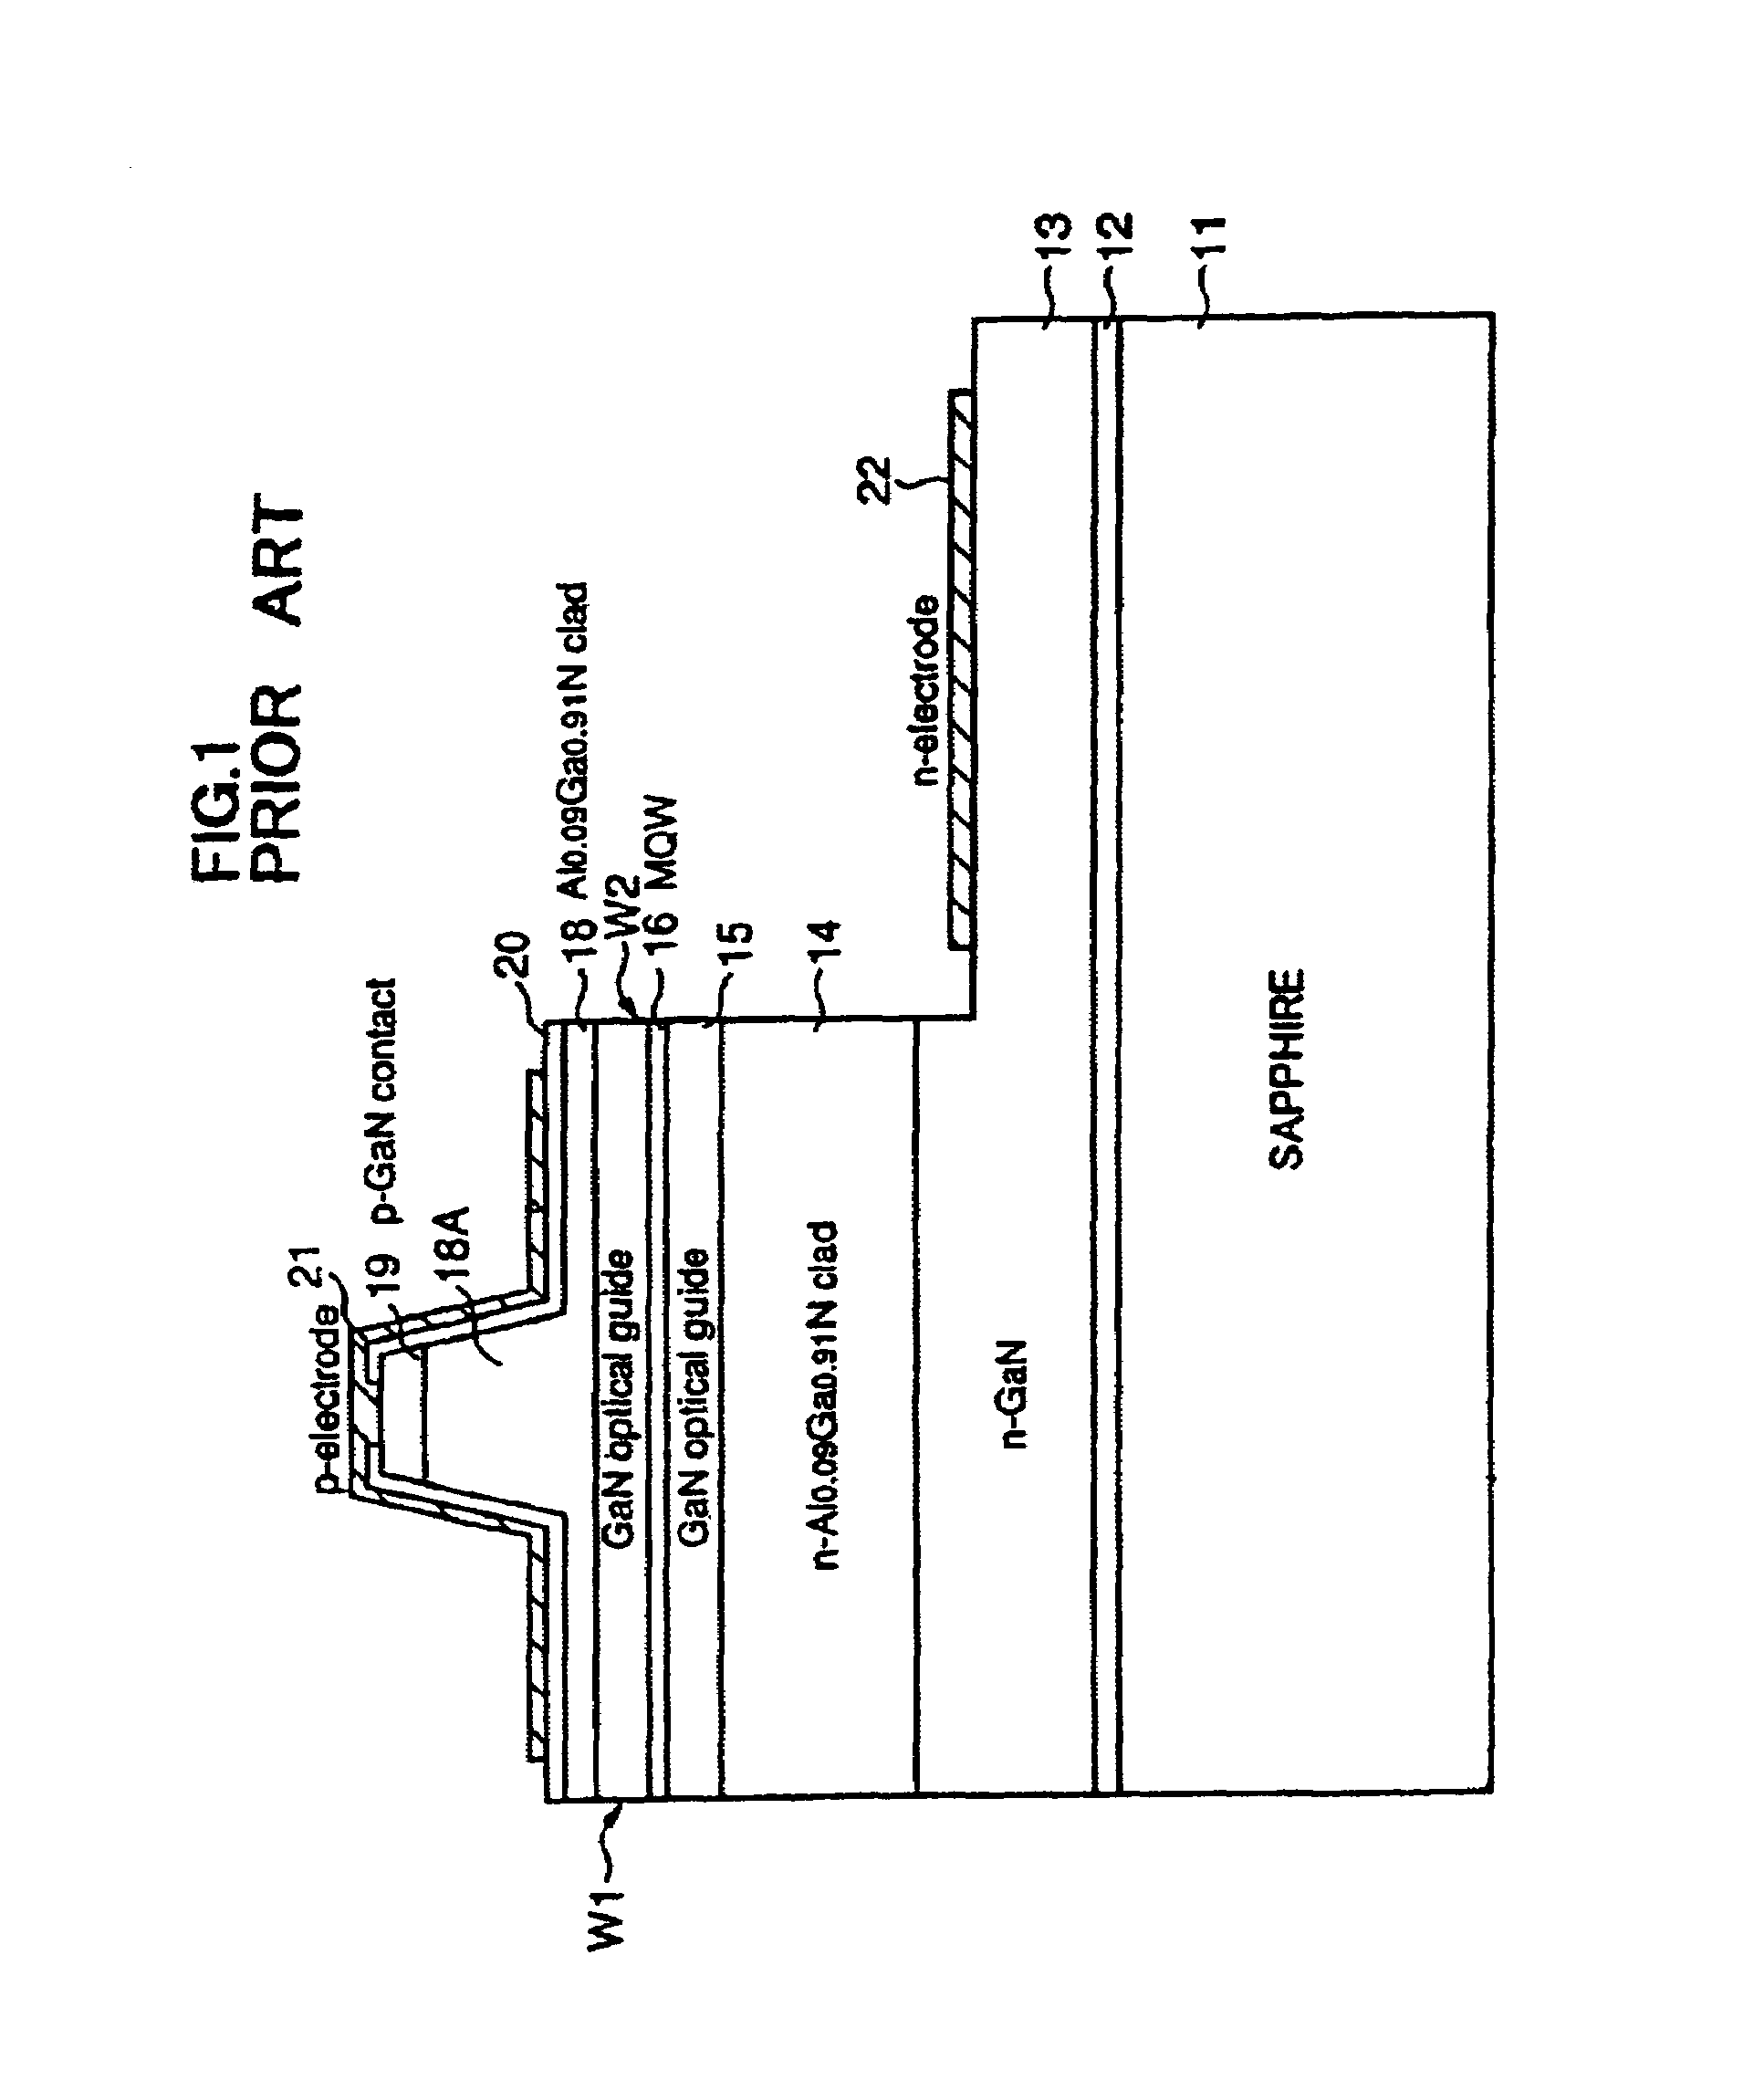 Optical semiconductor device having an epitaxial layer of III-V compound semiconductor material containing N as a group V element